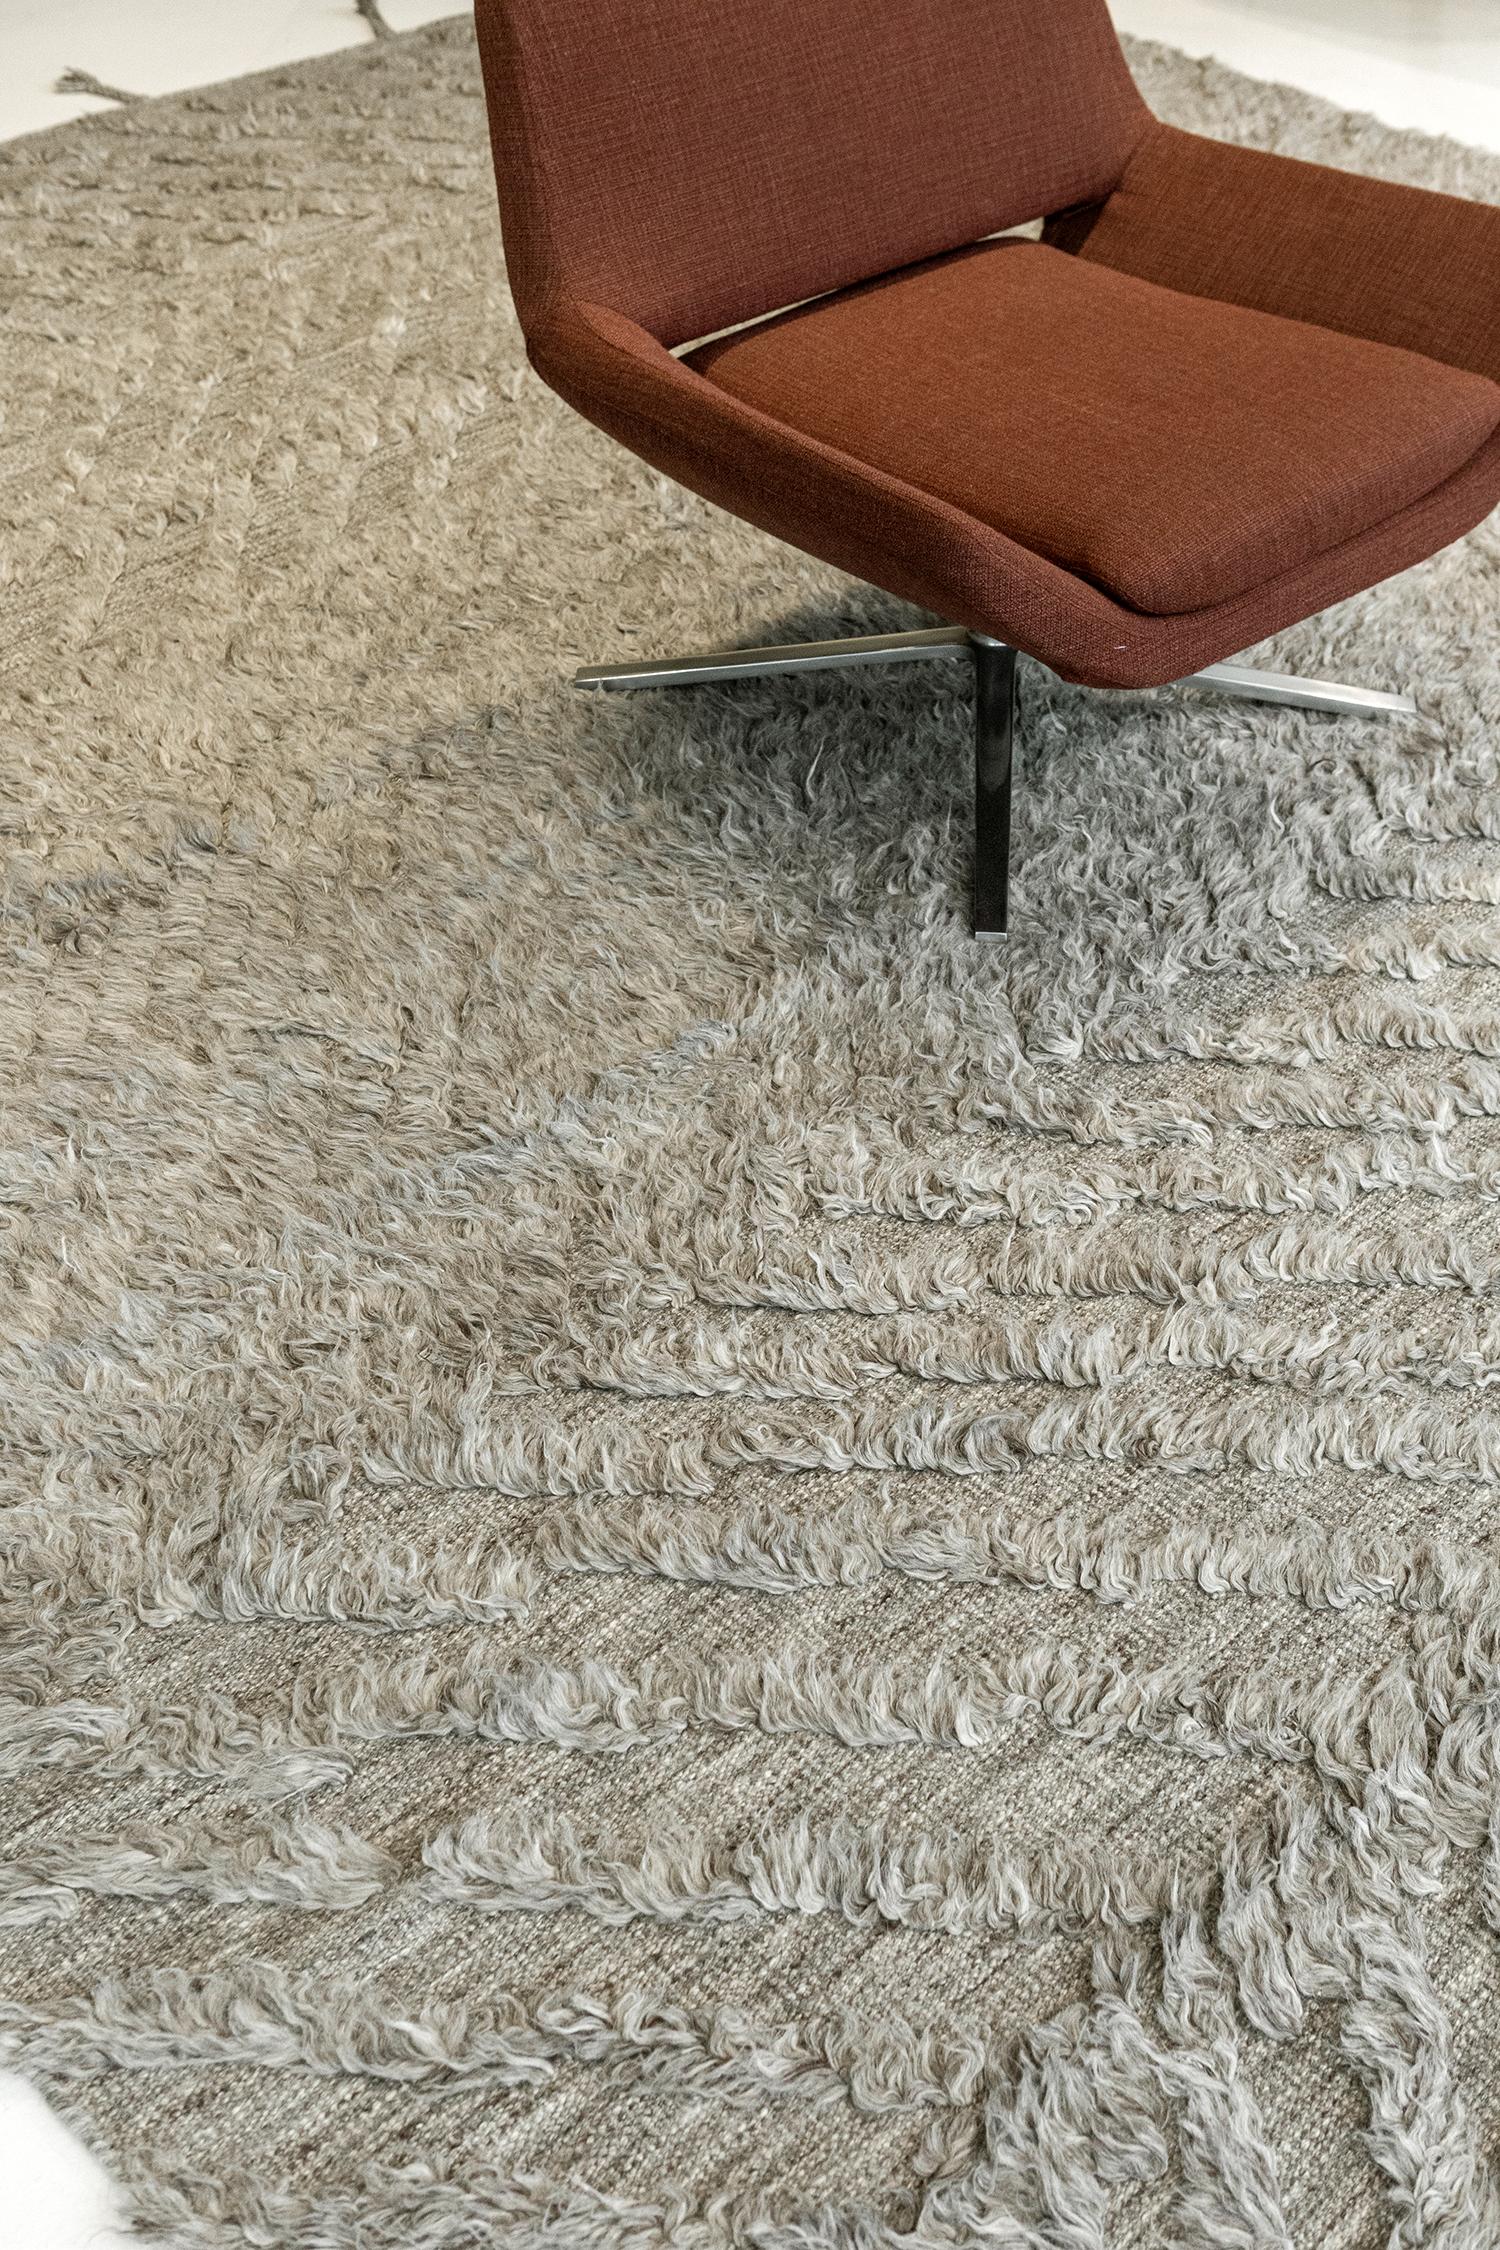 A plain and simple Zuma rug from ZigZigZag collection that features a zigzag pile weave pattern. This phenomenal work of art gives the inspiration to enhance your contemporary interiors. A gray tone that gives extra to your minimalist